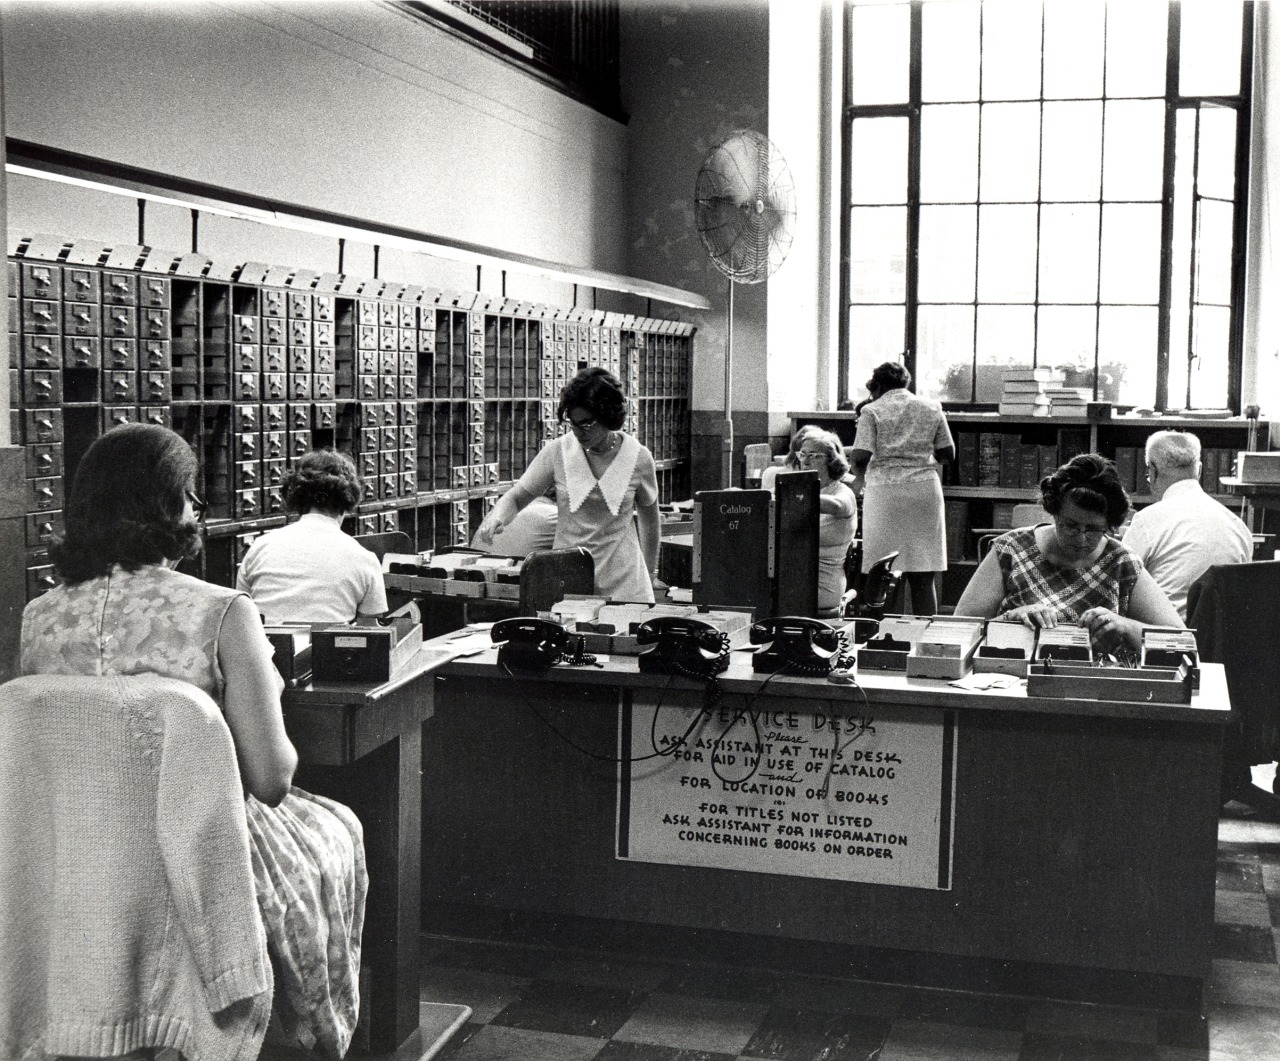 Black and white photo of the Service Desk/Workroom area, also from 1973.